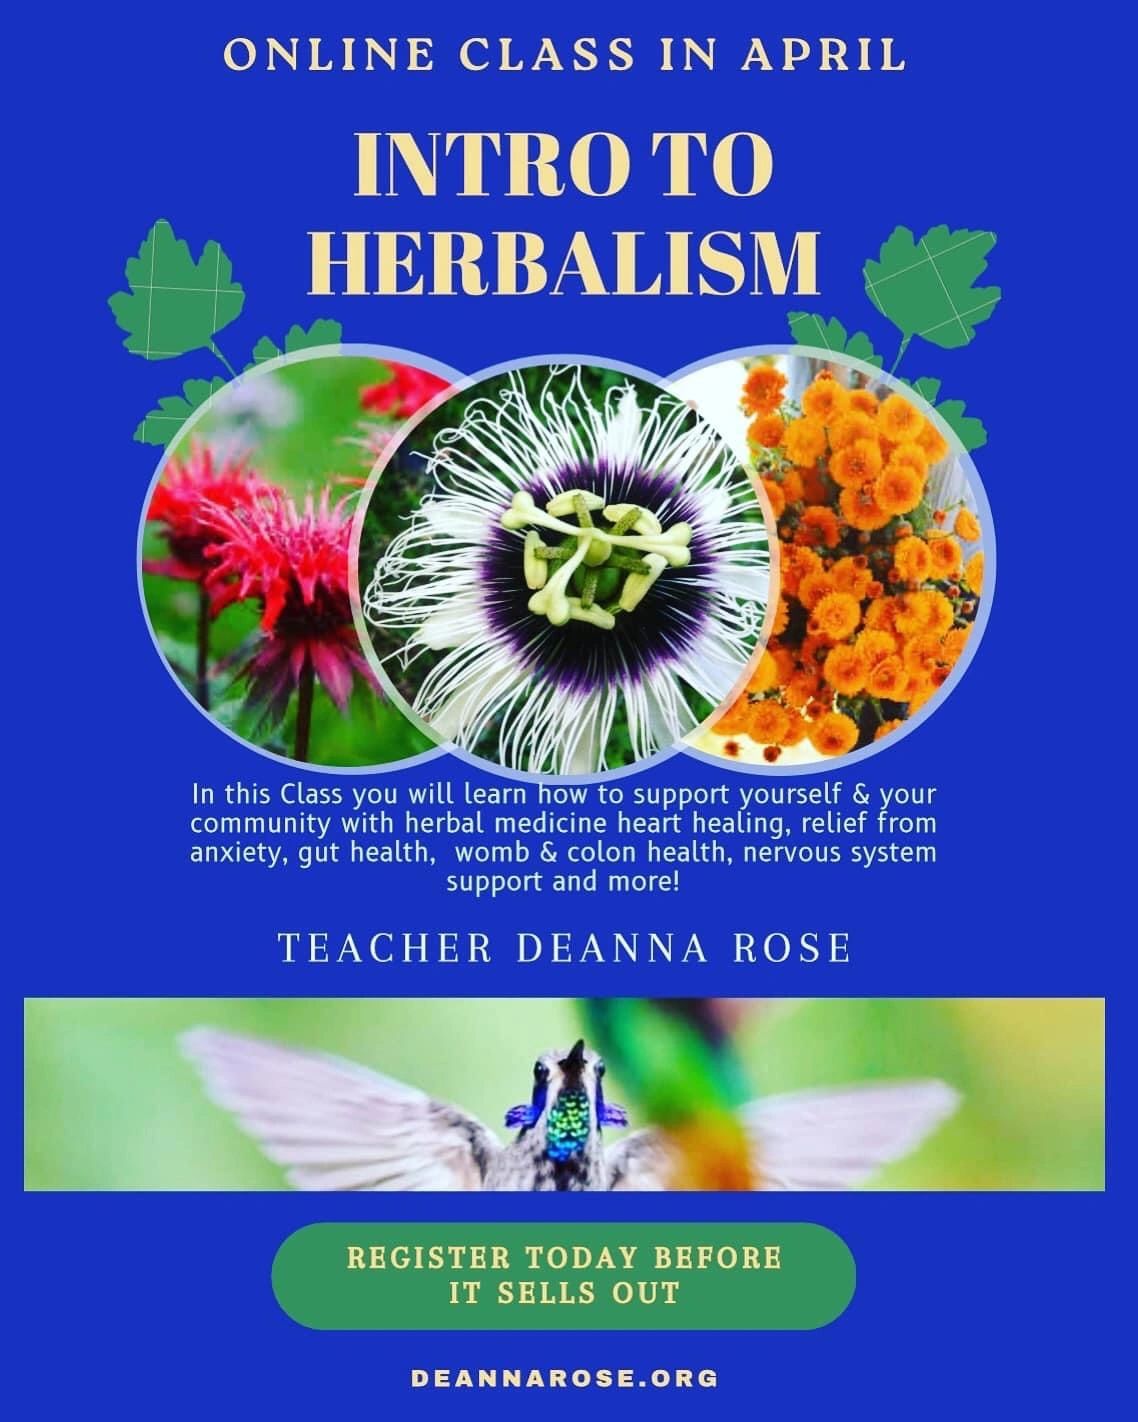 🌹Intro to Herbalism 🌹

Please share to help spread the word about this class 🦋

A four week class